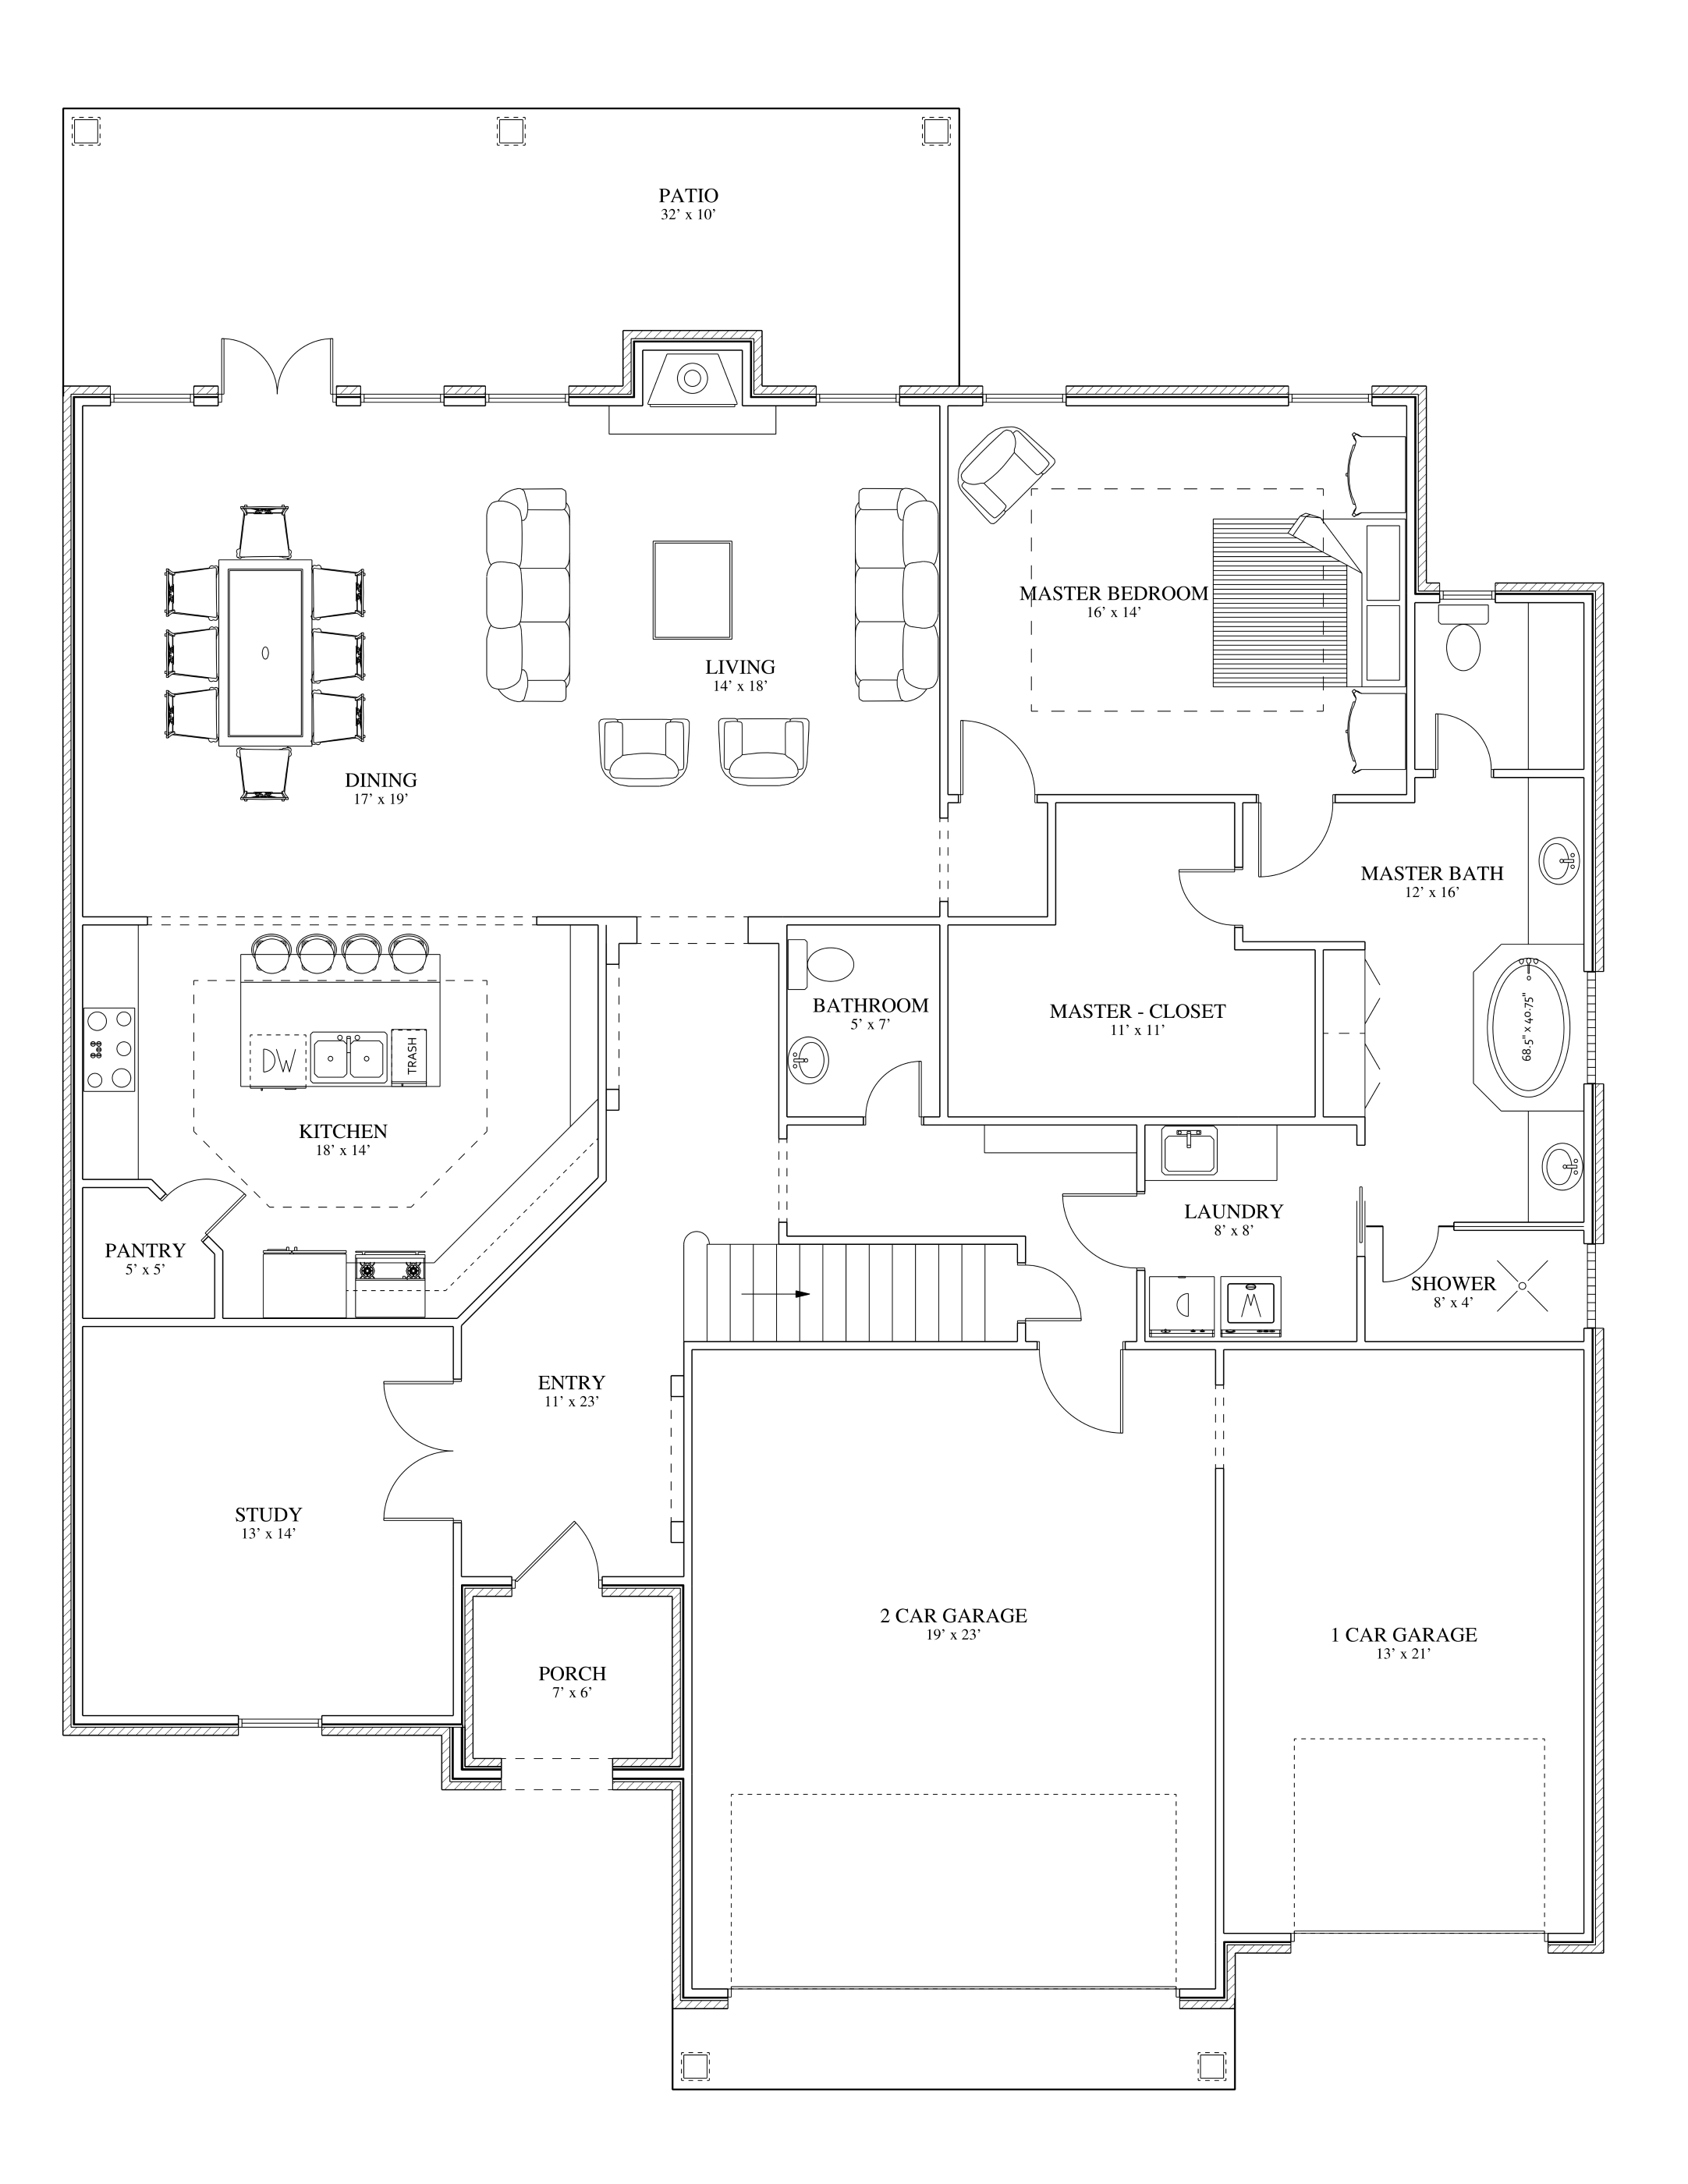 The Patsy First Floor Blueprint Plan